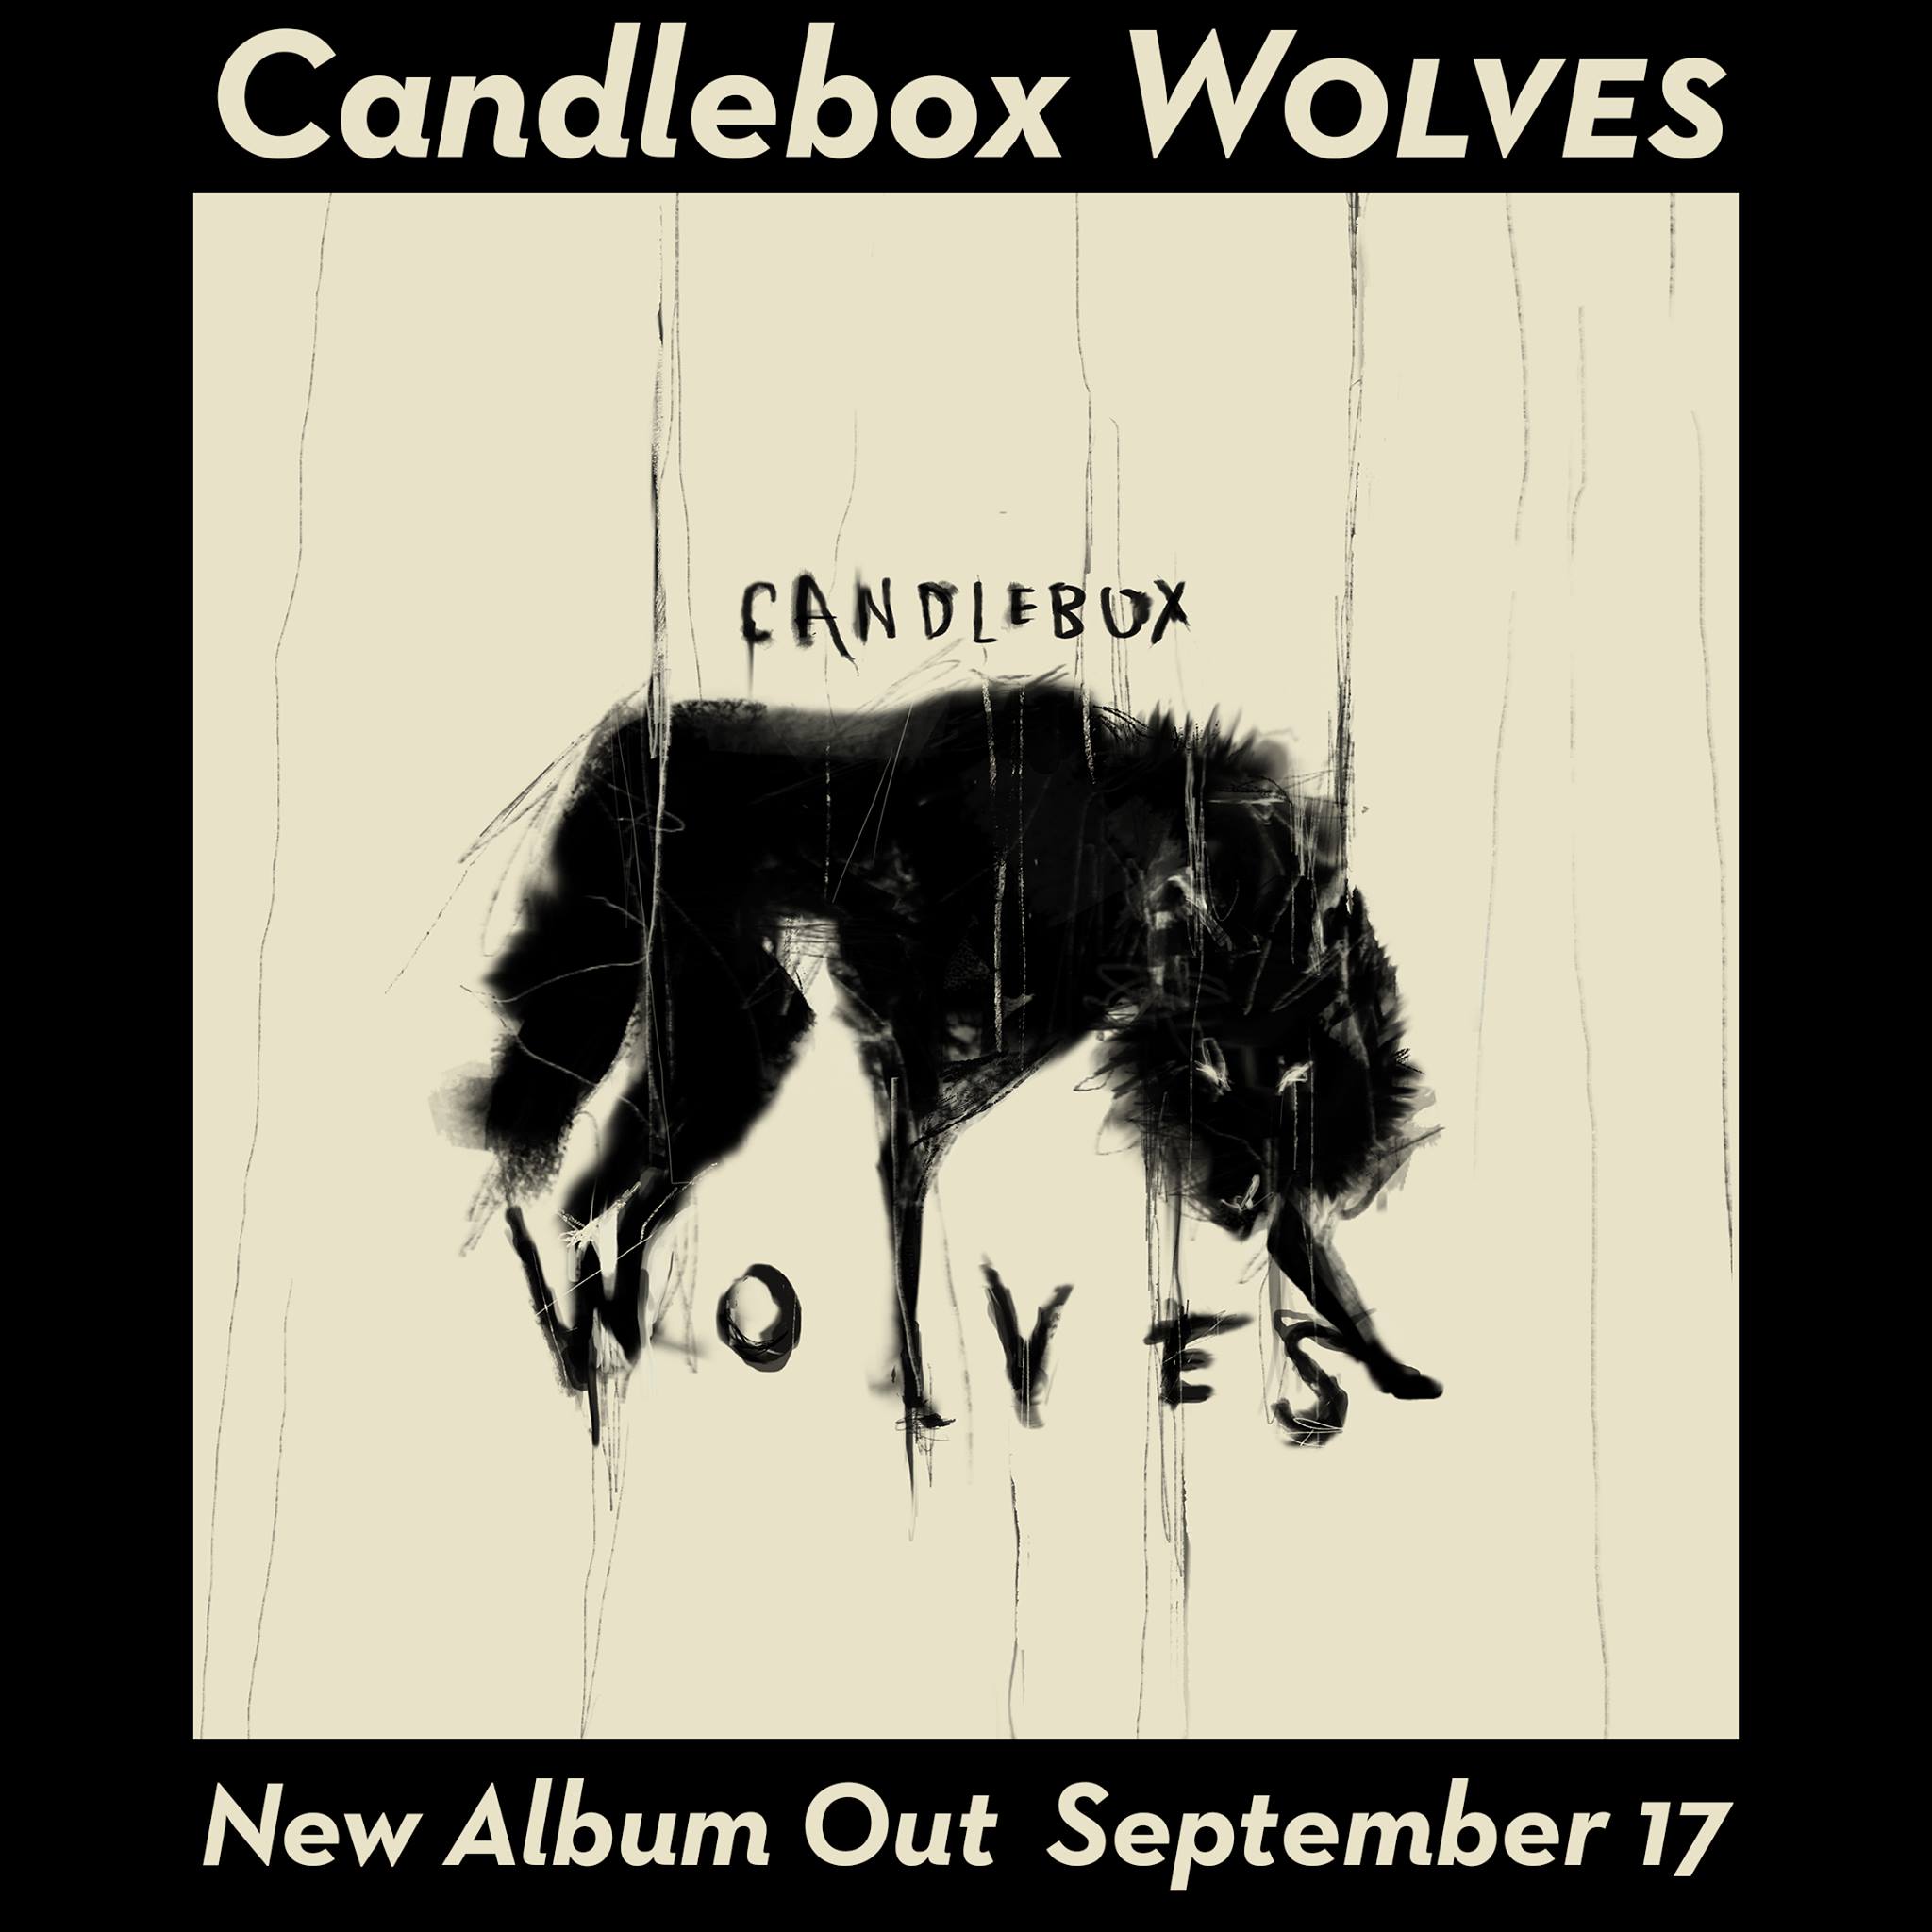 Candlebox's Wolves